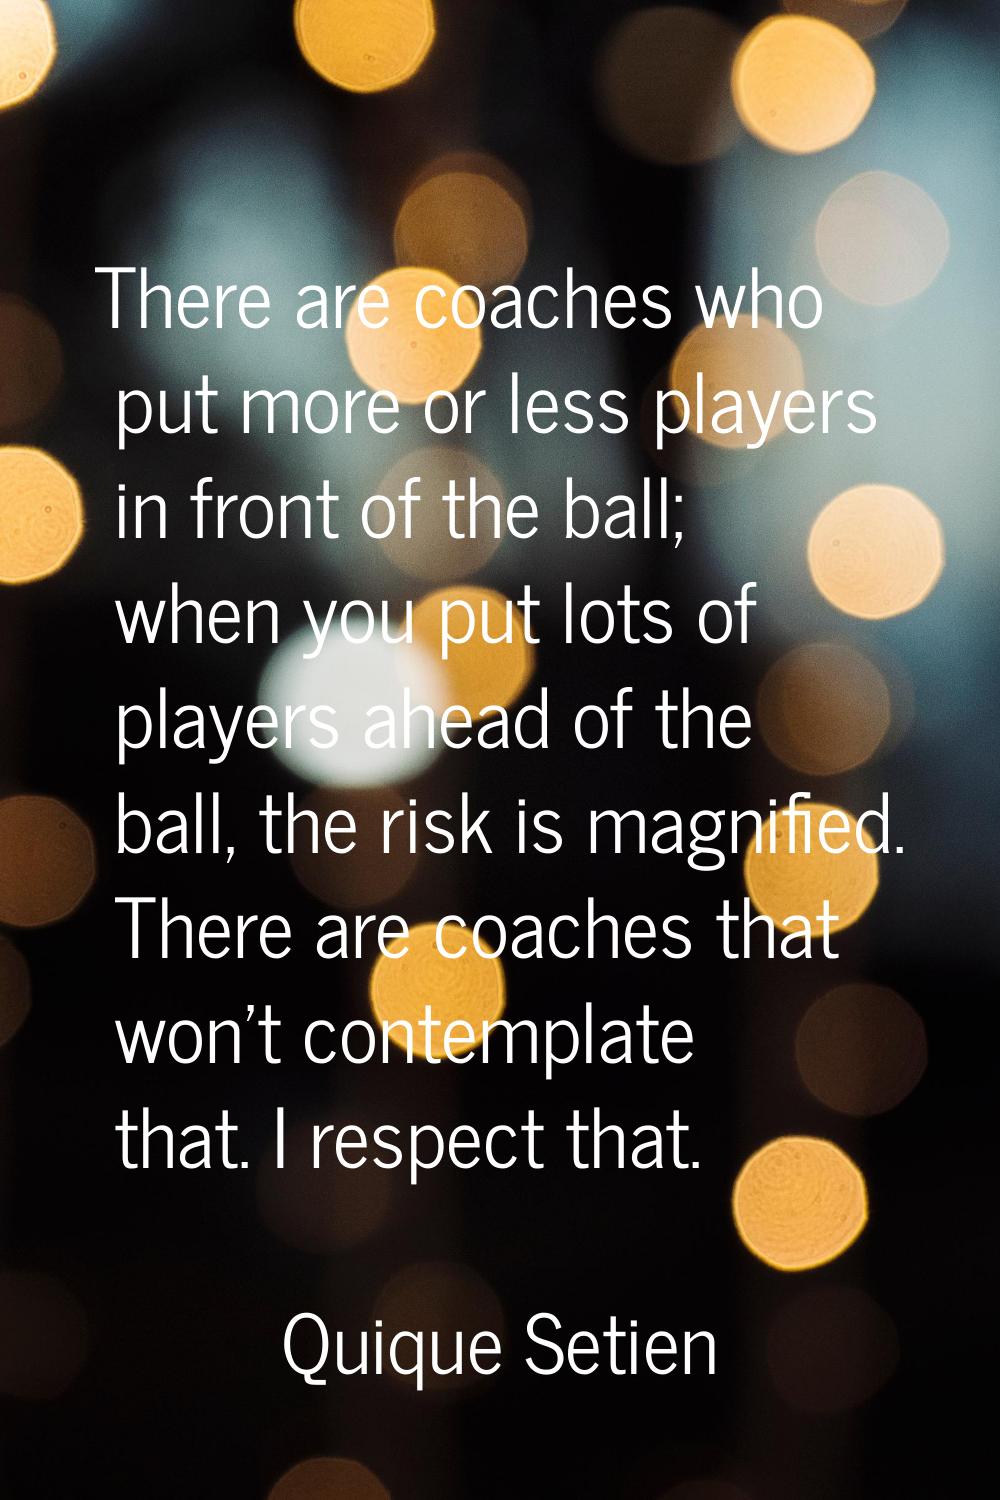 There are coaches who put more or less players in front of the ball; when you put lots of players a